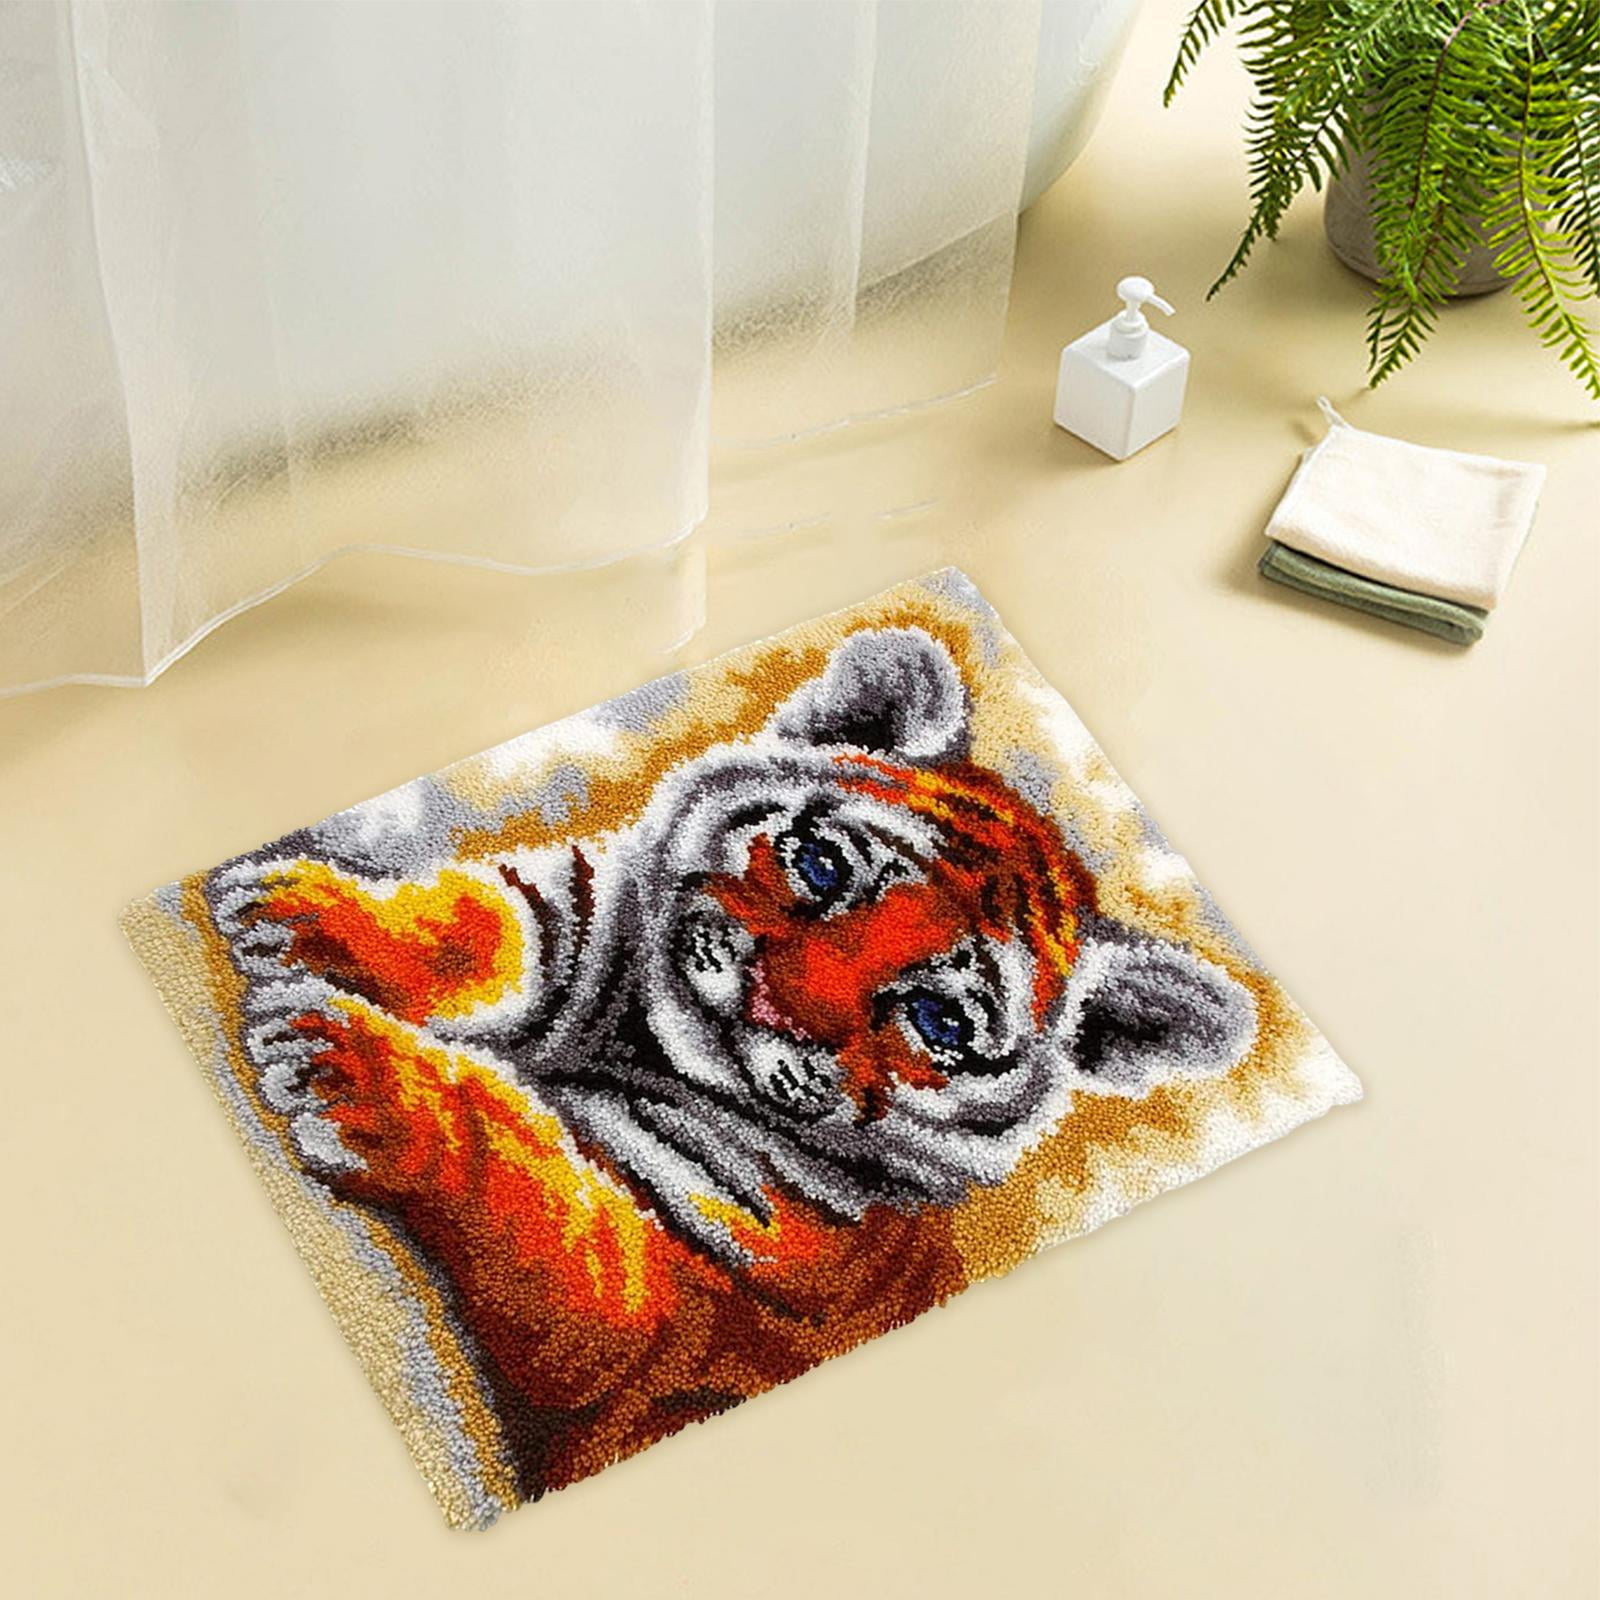 Tiger Latch Hook Rugs Kits for Adults with printed pattern Smyrna